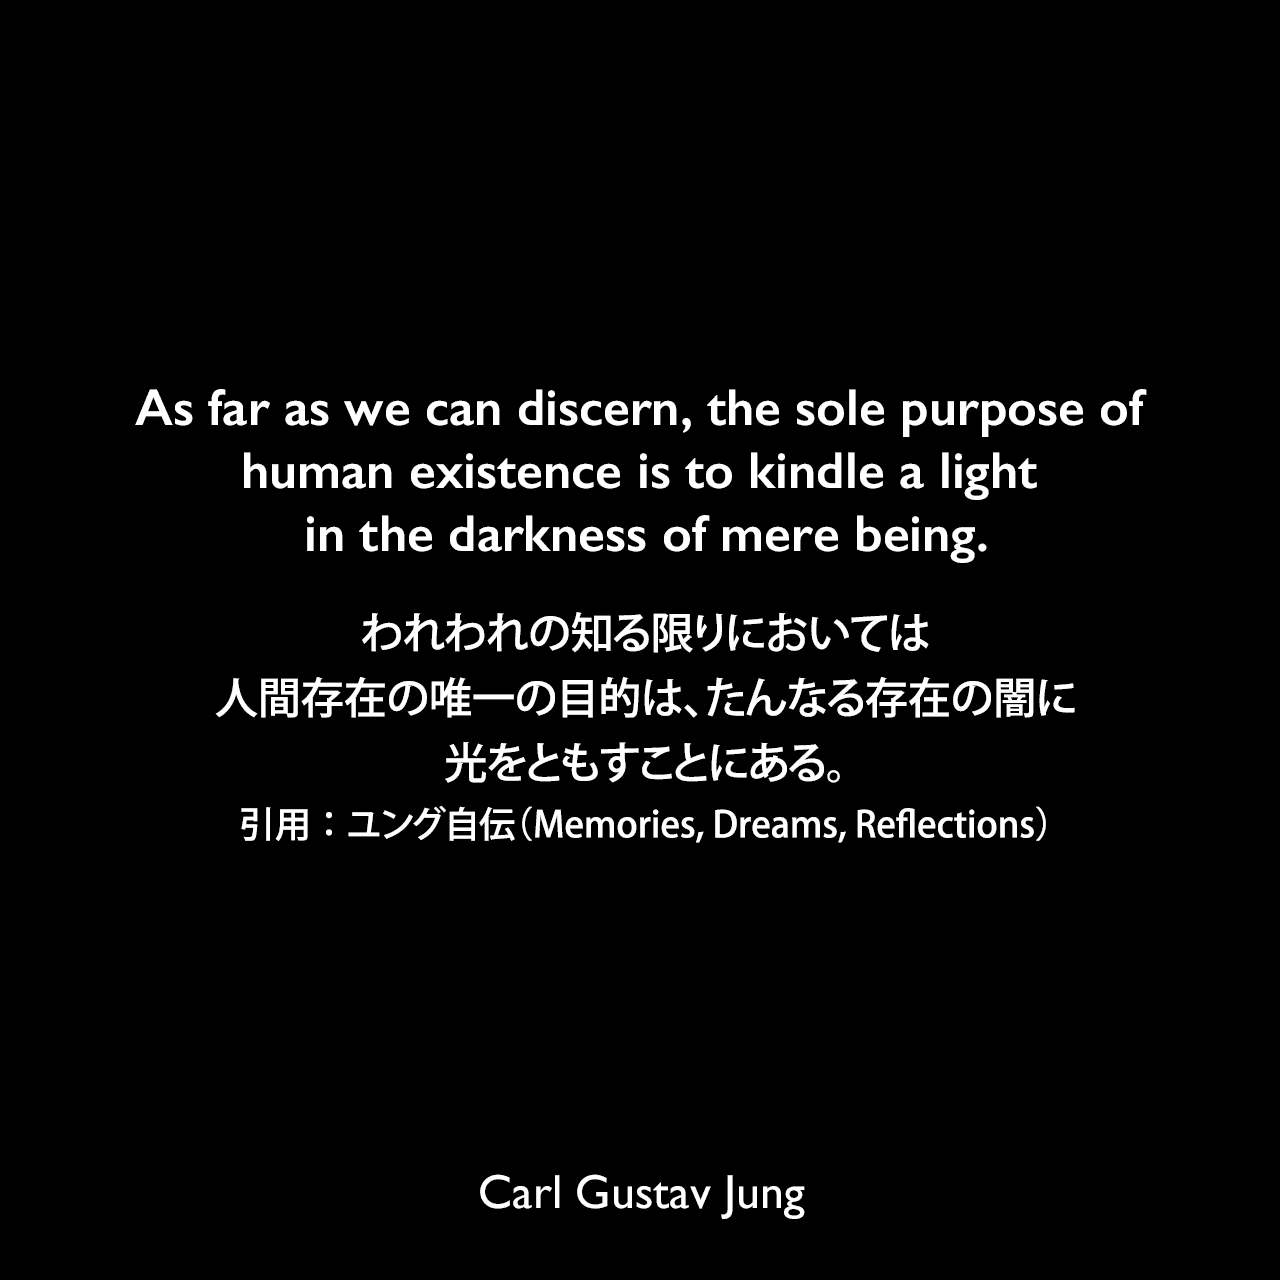 As far as we can discern, the sole purpose of human existence is to kindle a light in the darkness of mere being.われわれの知る限りにおいては、人間存在の唯一の目的は、たんなる存在の闇に光をともすことにある。- ユングによる本「Memories, Dreams, Reflections」よりCarl Gustav Jung